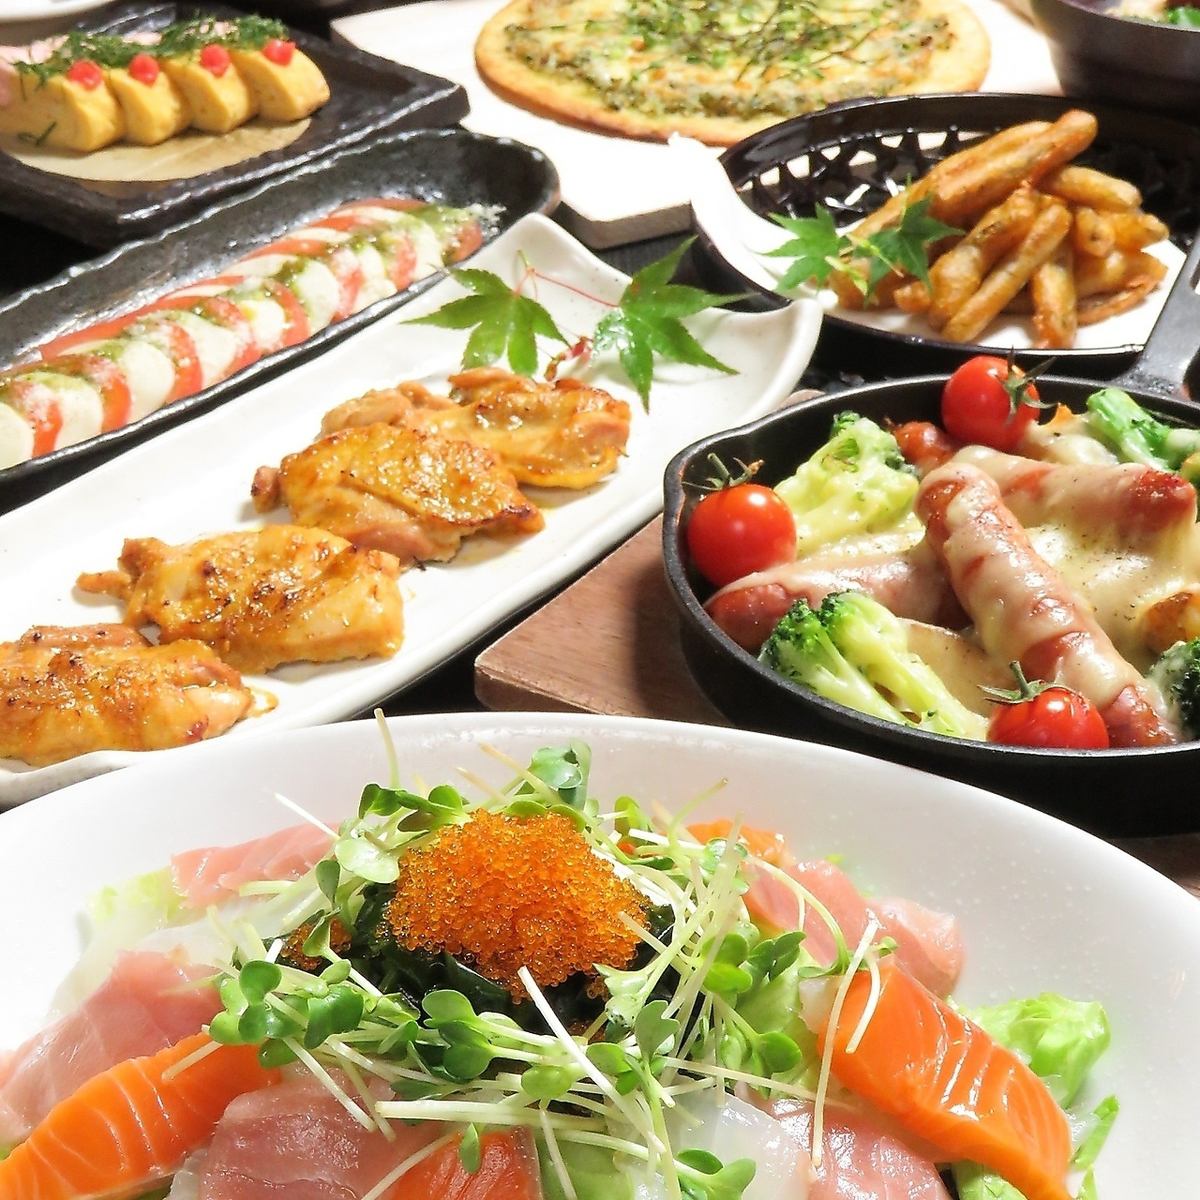 Banquet courses are available starting from 4,000 yen ♪ Please feel free to contact us.